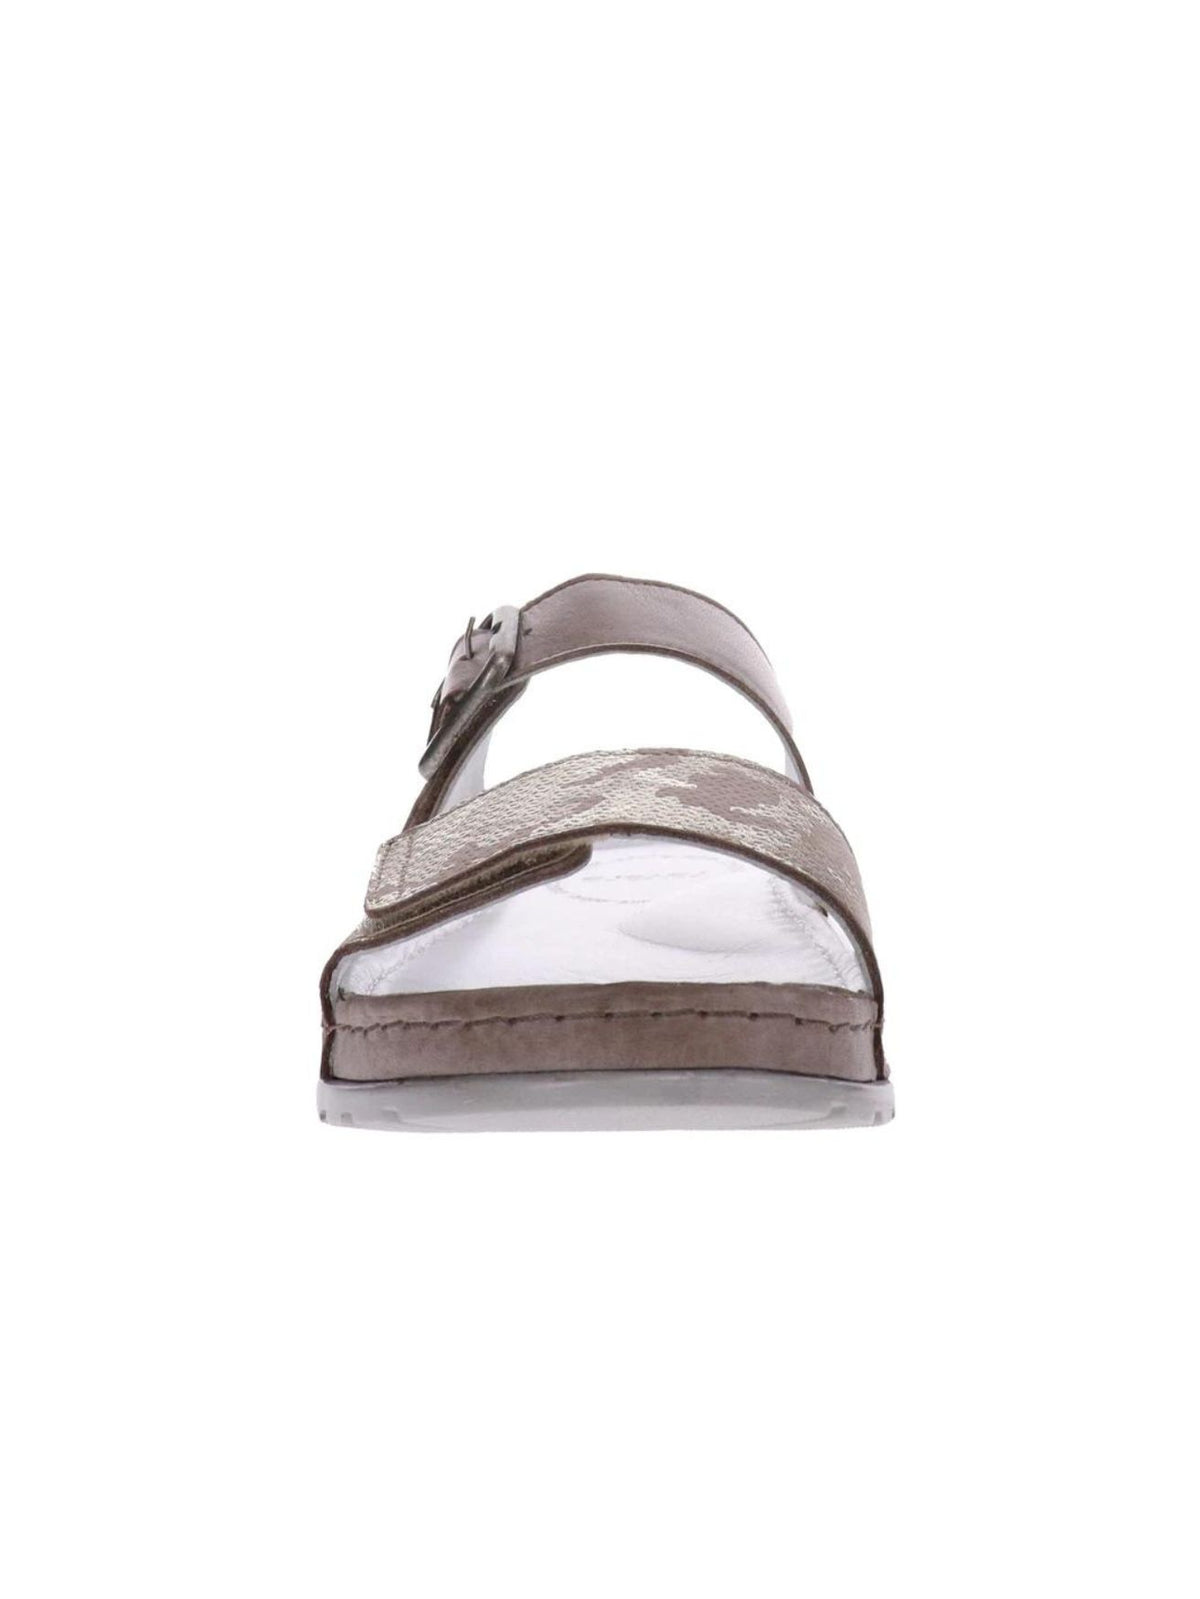 revere palma  2 strap slide sandals in taupe-front view